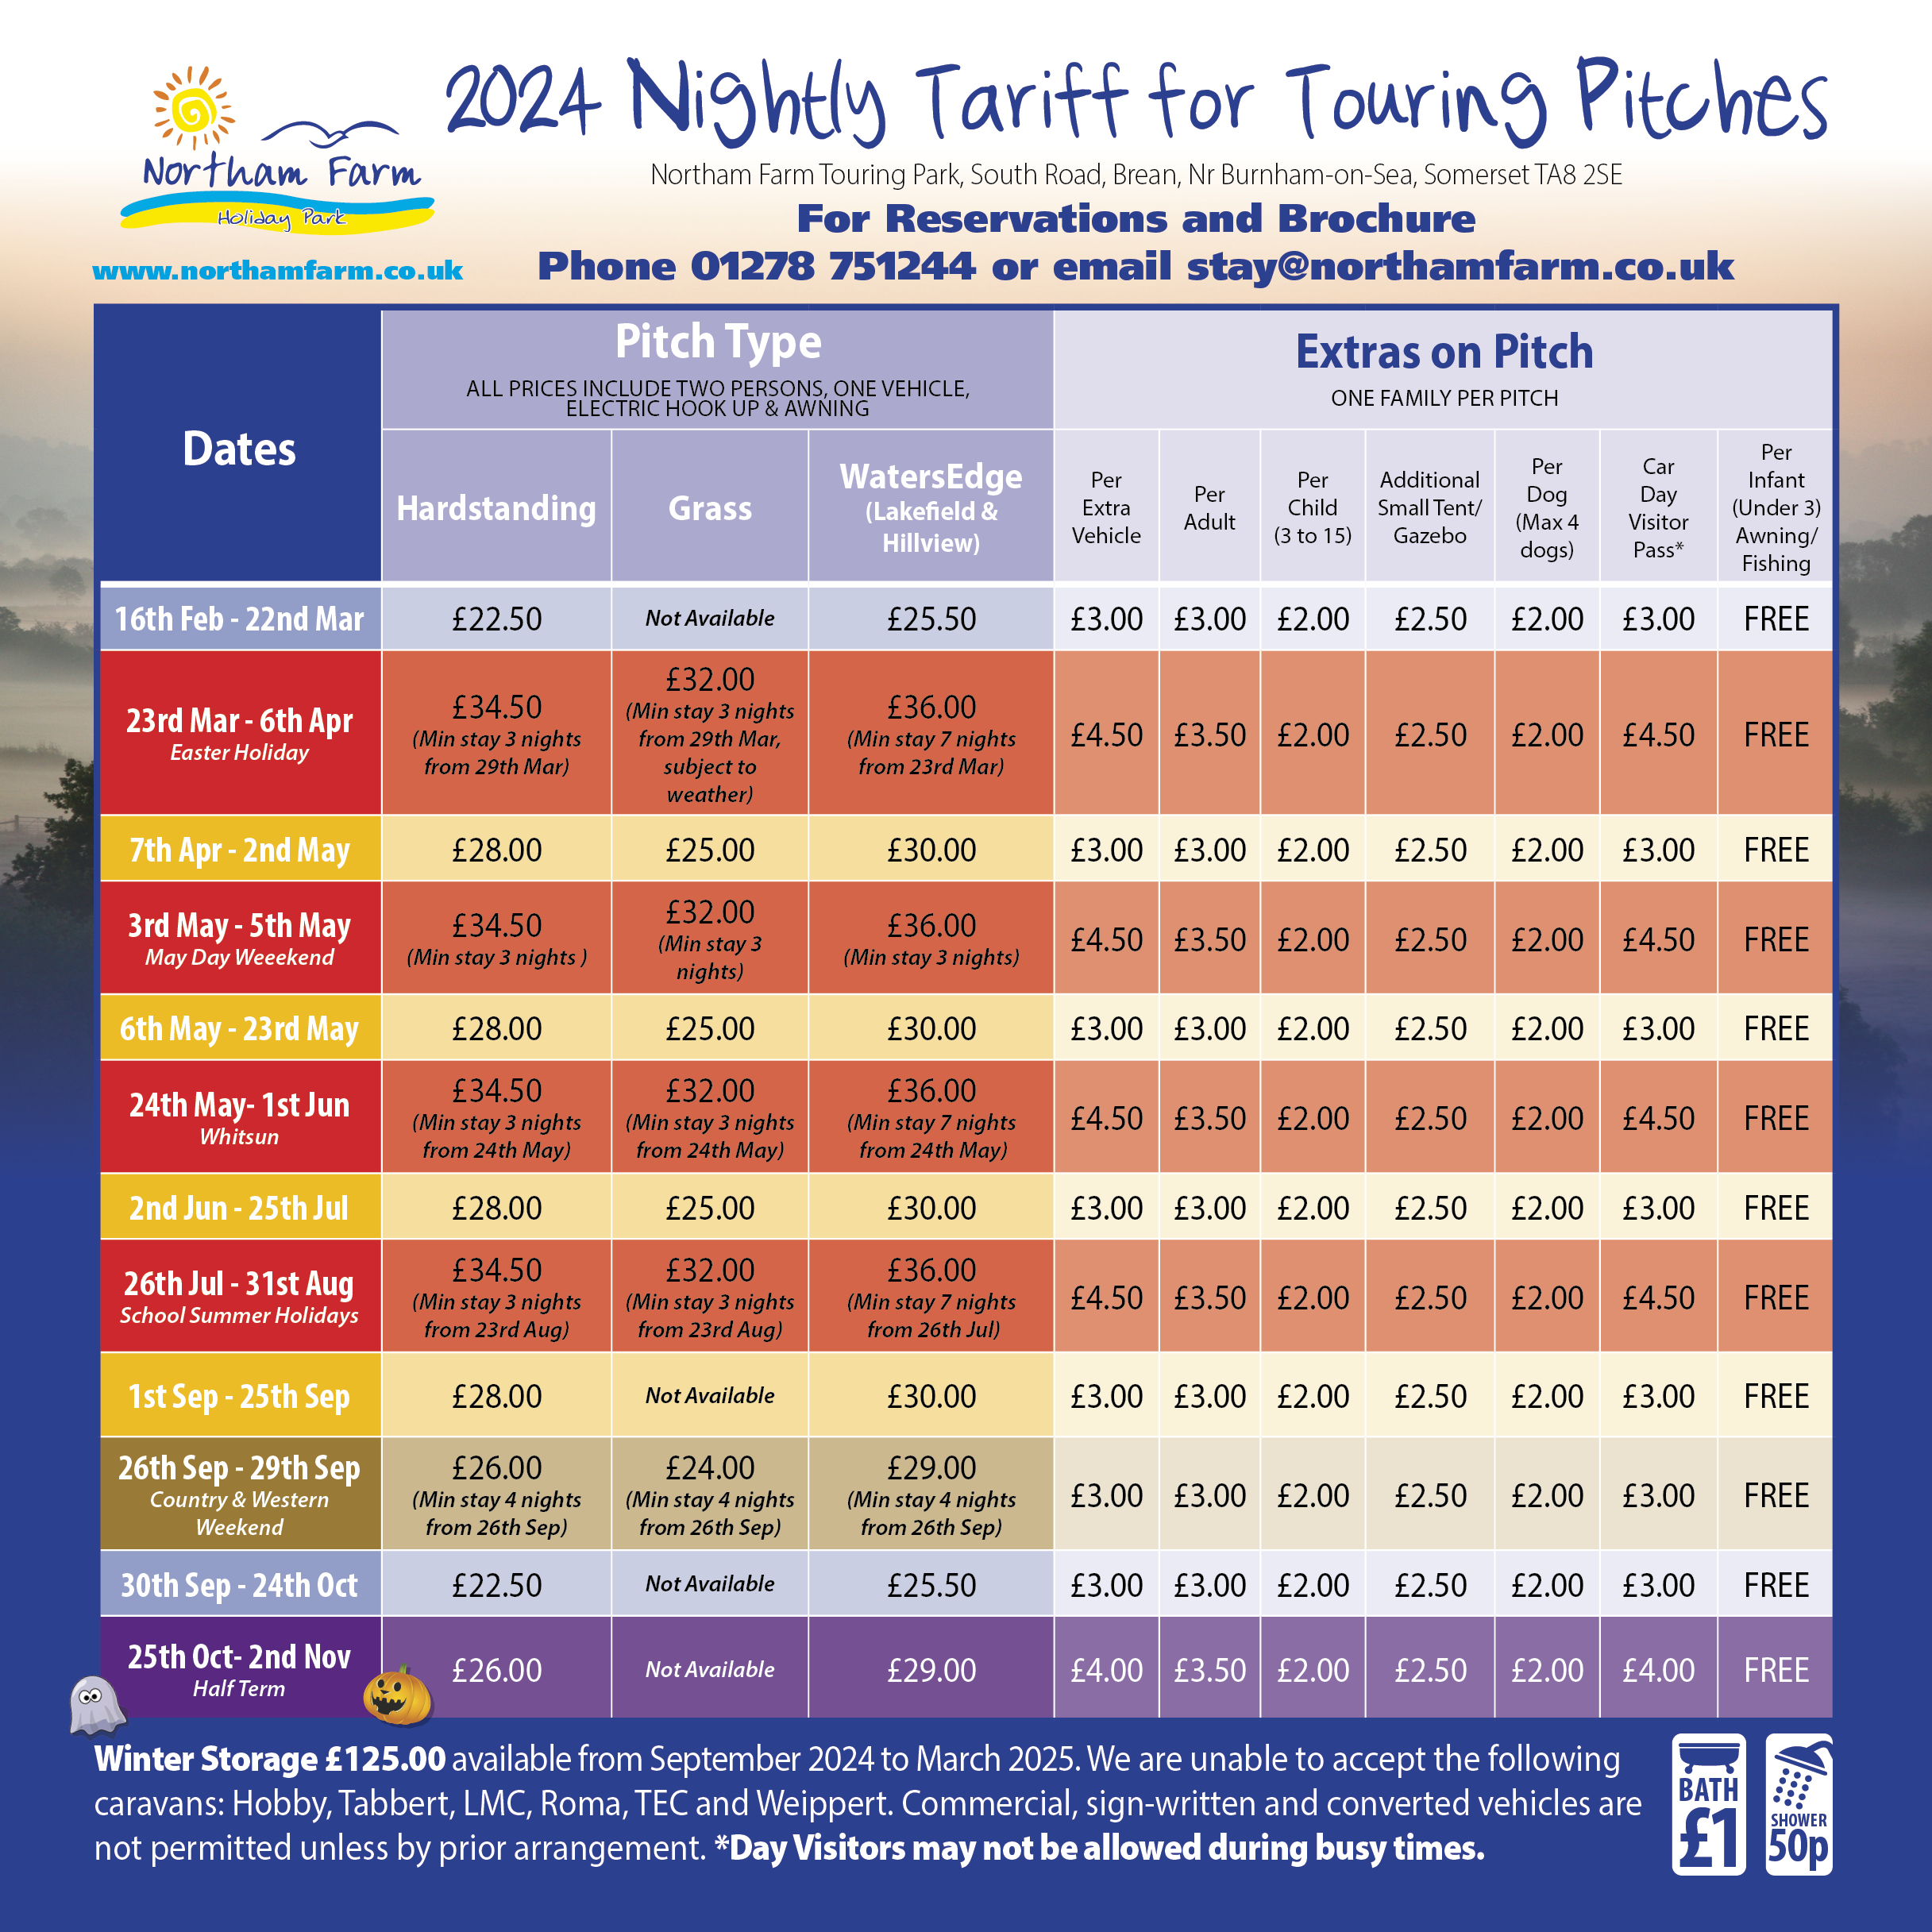 Northam Farm 2019 Nightly Tariff Touring Pitches Print Out